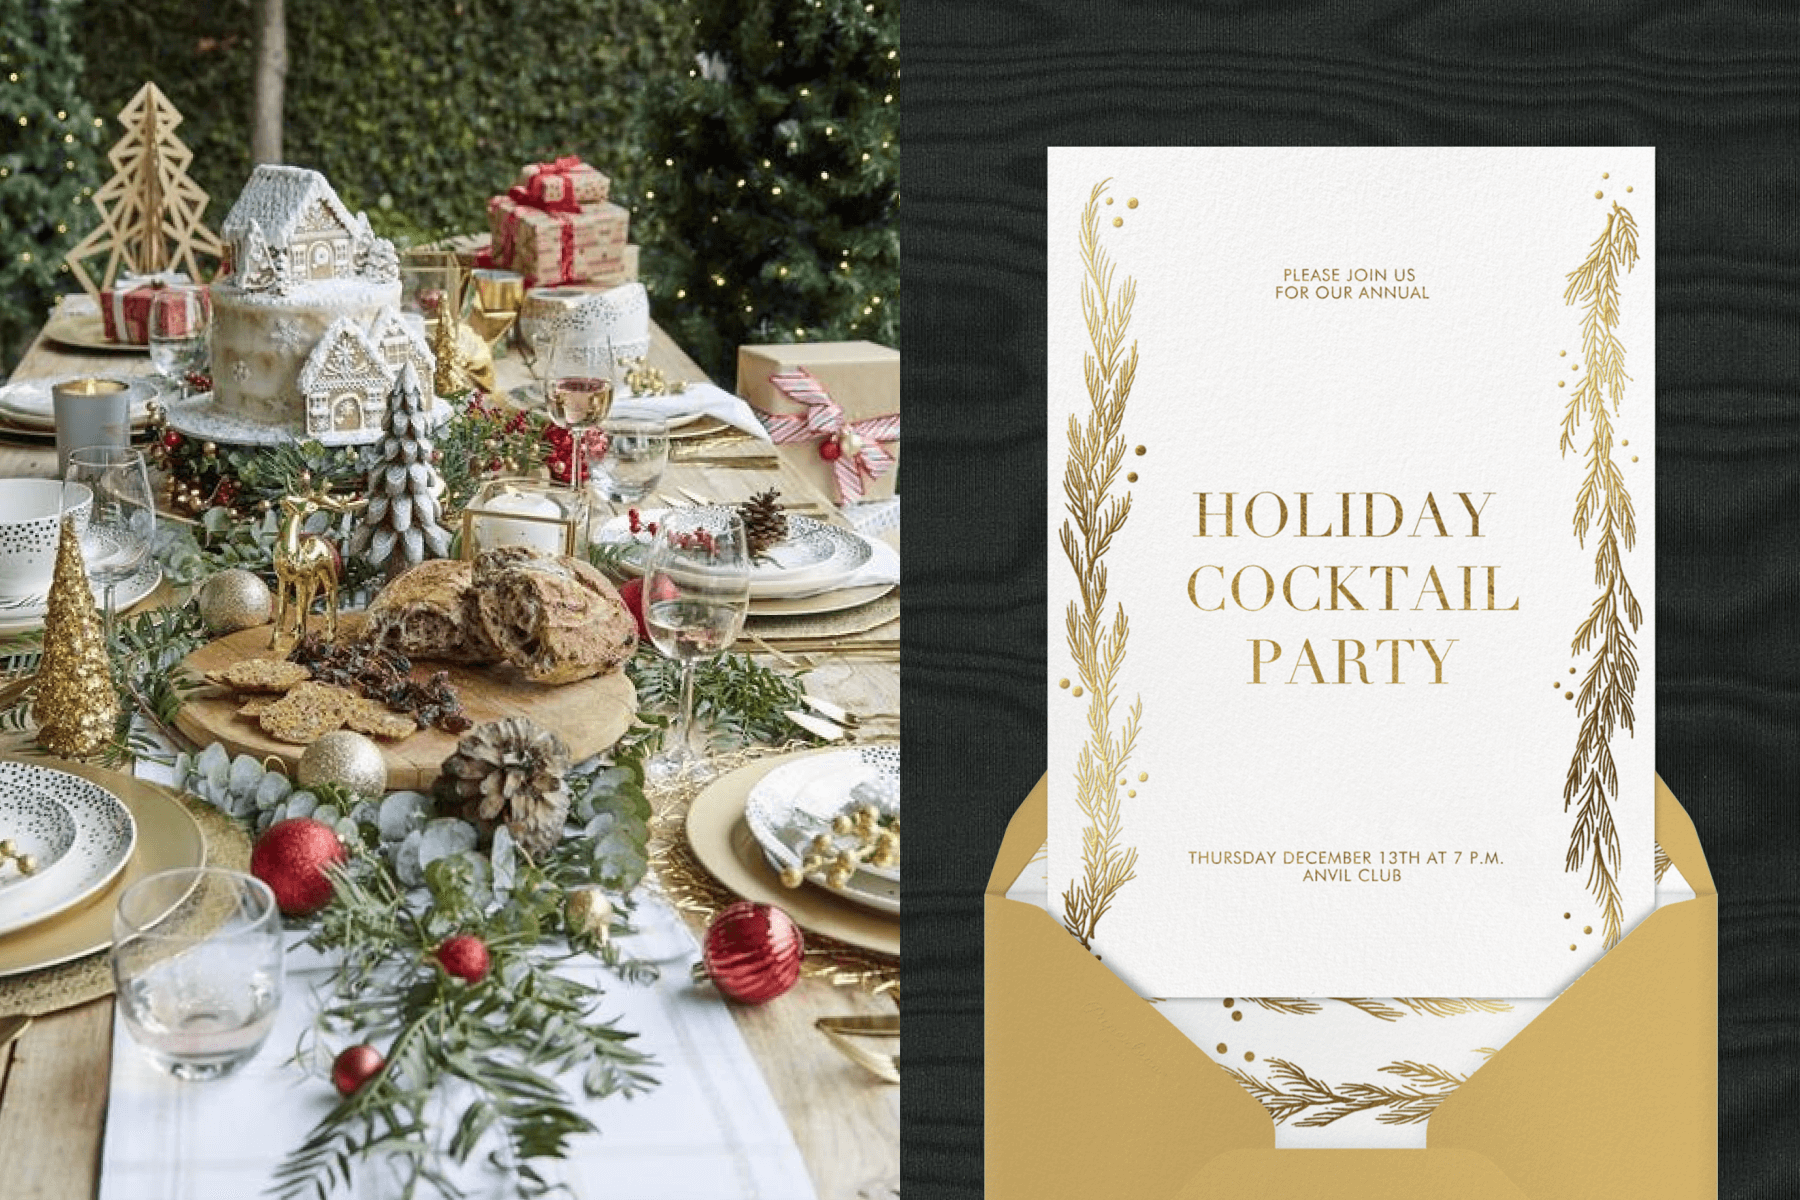 Left: A lushly decorated Christmas table with greenery, ornaments, and a snowy house cake; right: a white holiday party invitation with gold pine boughs on the sides.